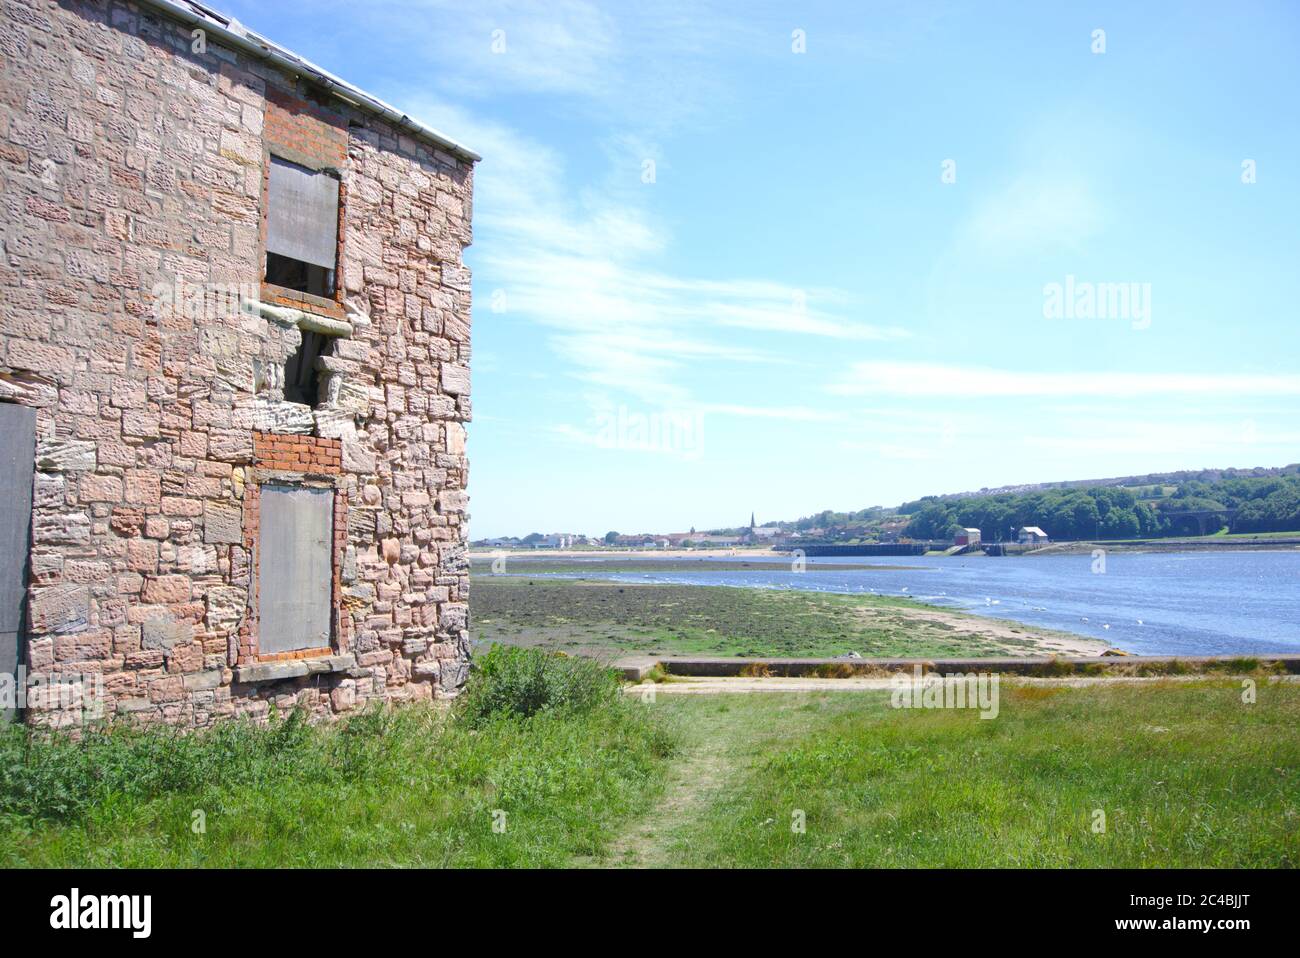 Ruined two-storey building near the mouth of the River Tweed, Berwick-upon-Tweed, Northumberland, UK. Stock Photo